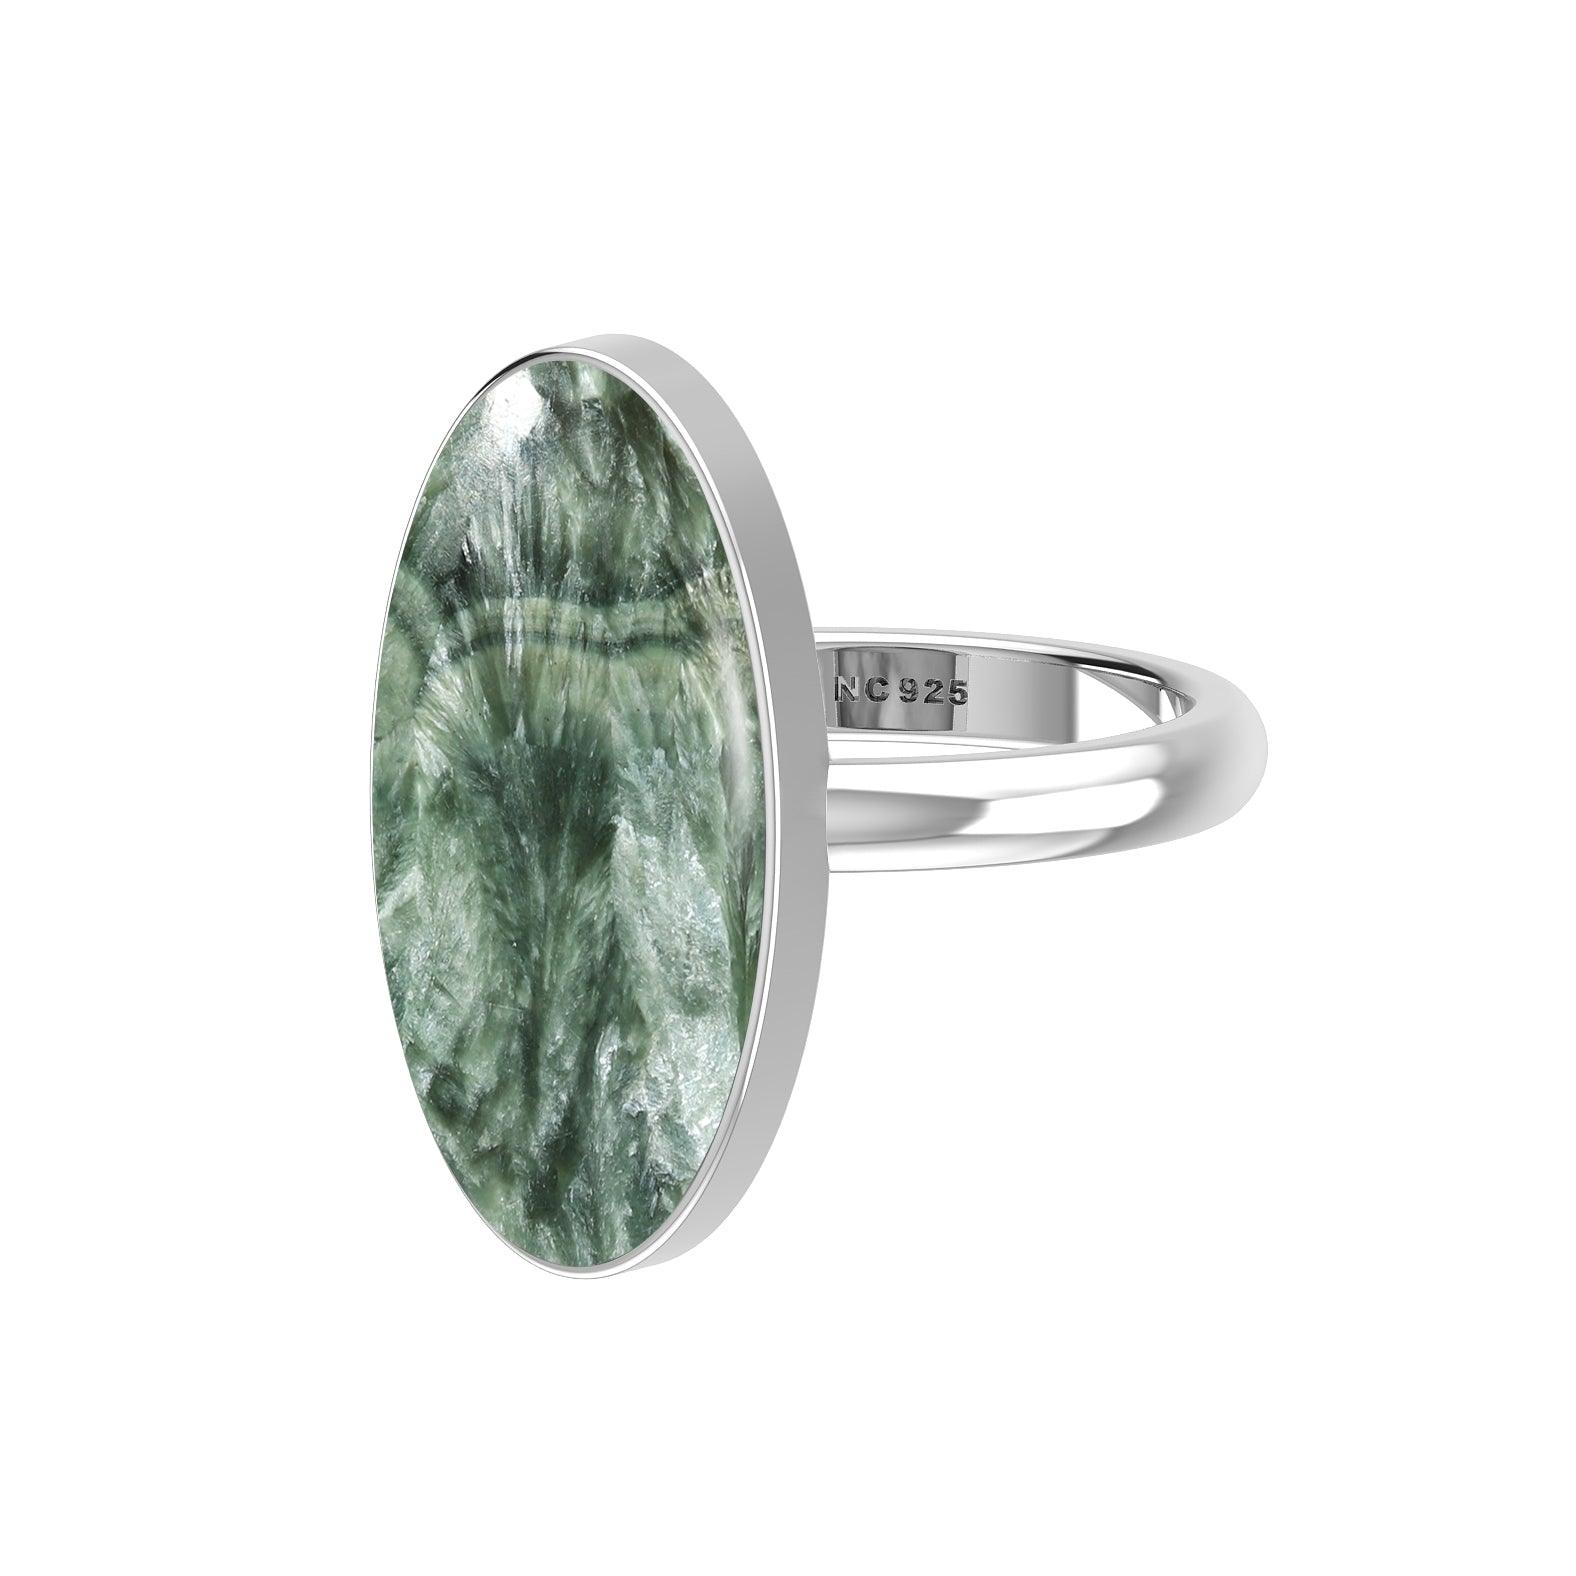 Natural Seraphinite Ring 925 Sterling Silver Bezel Set Handmade Jewelry Pack of 6 - (Box 7)